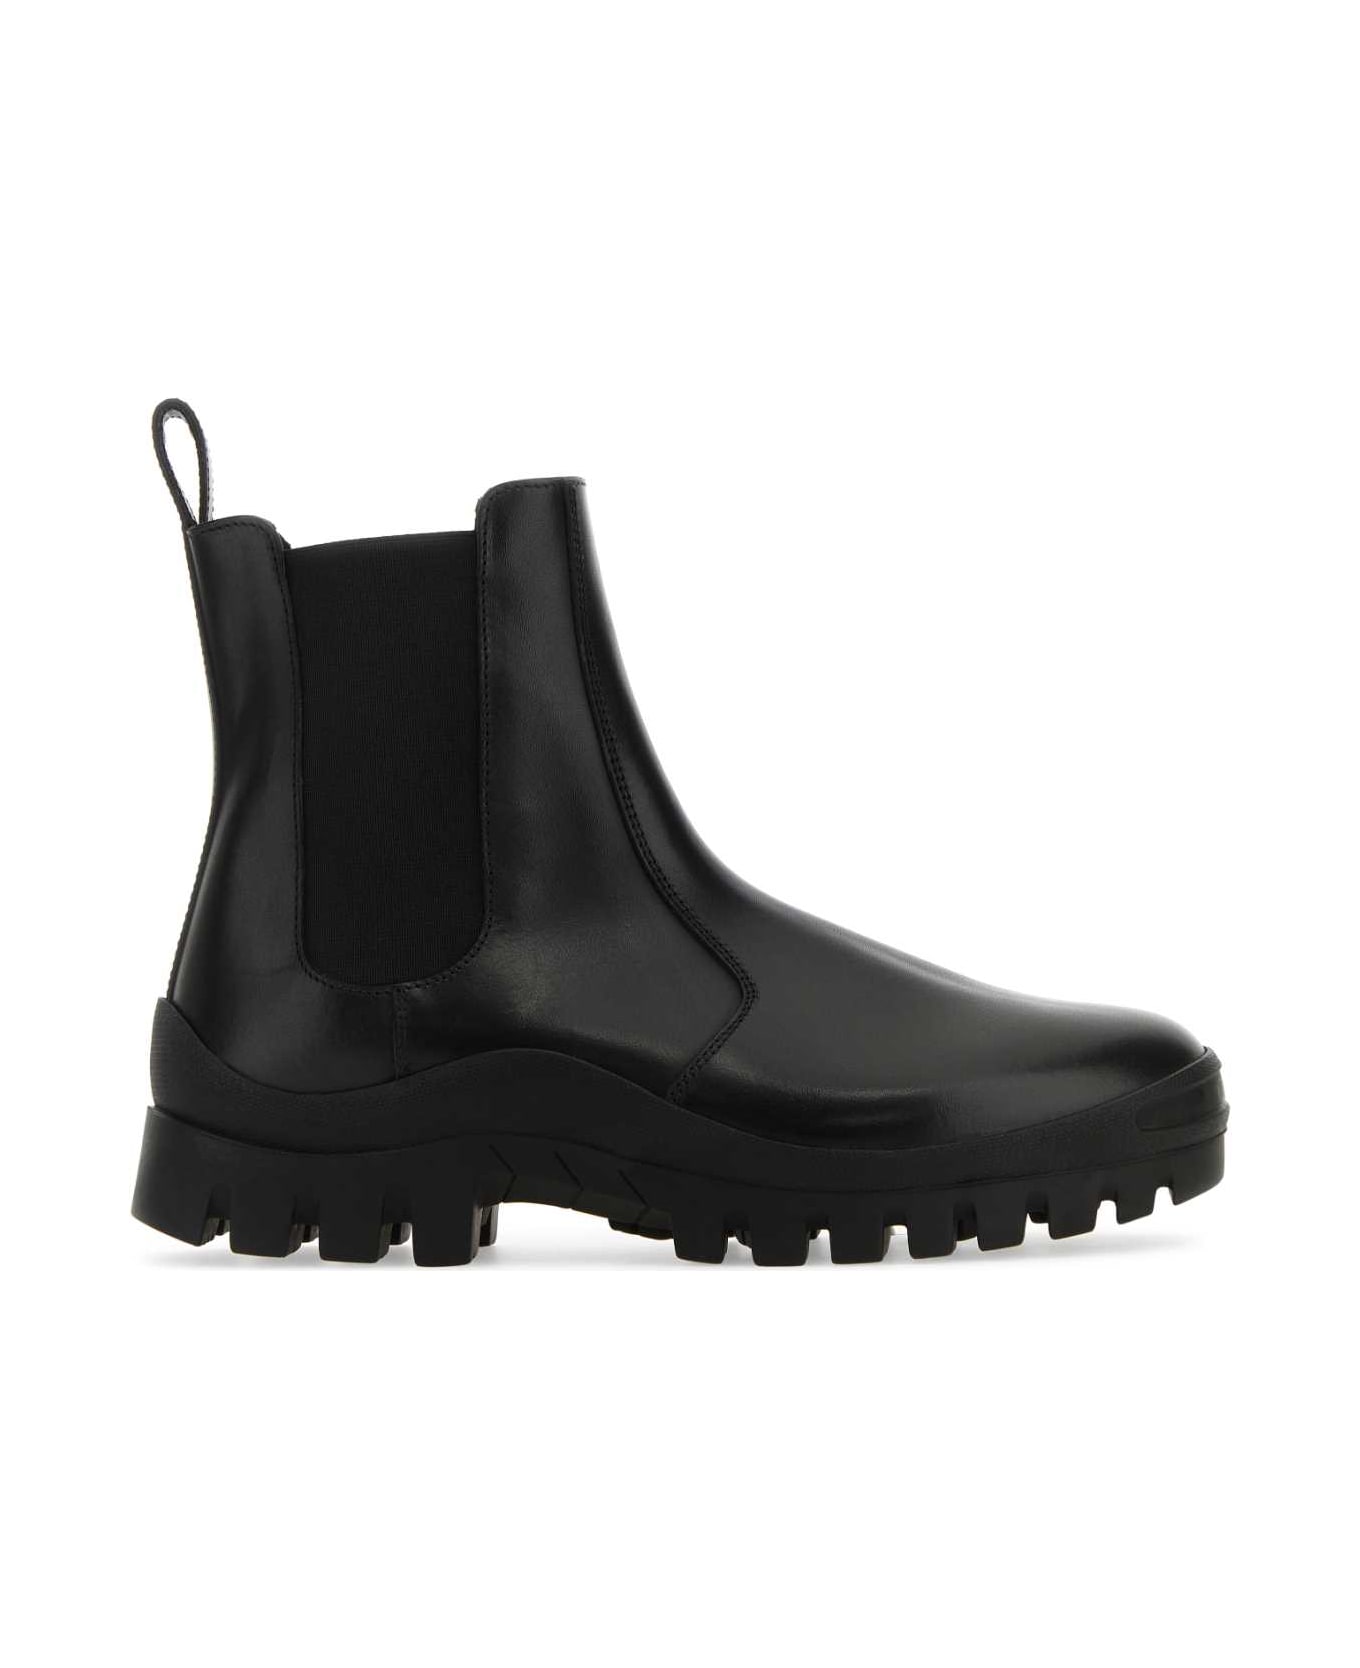 The Row Black Leather Greta Winter Ankle Boots - Black ブーツ